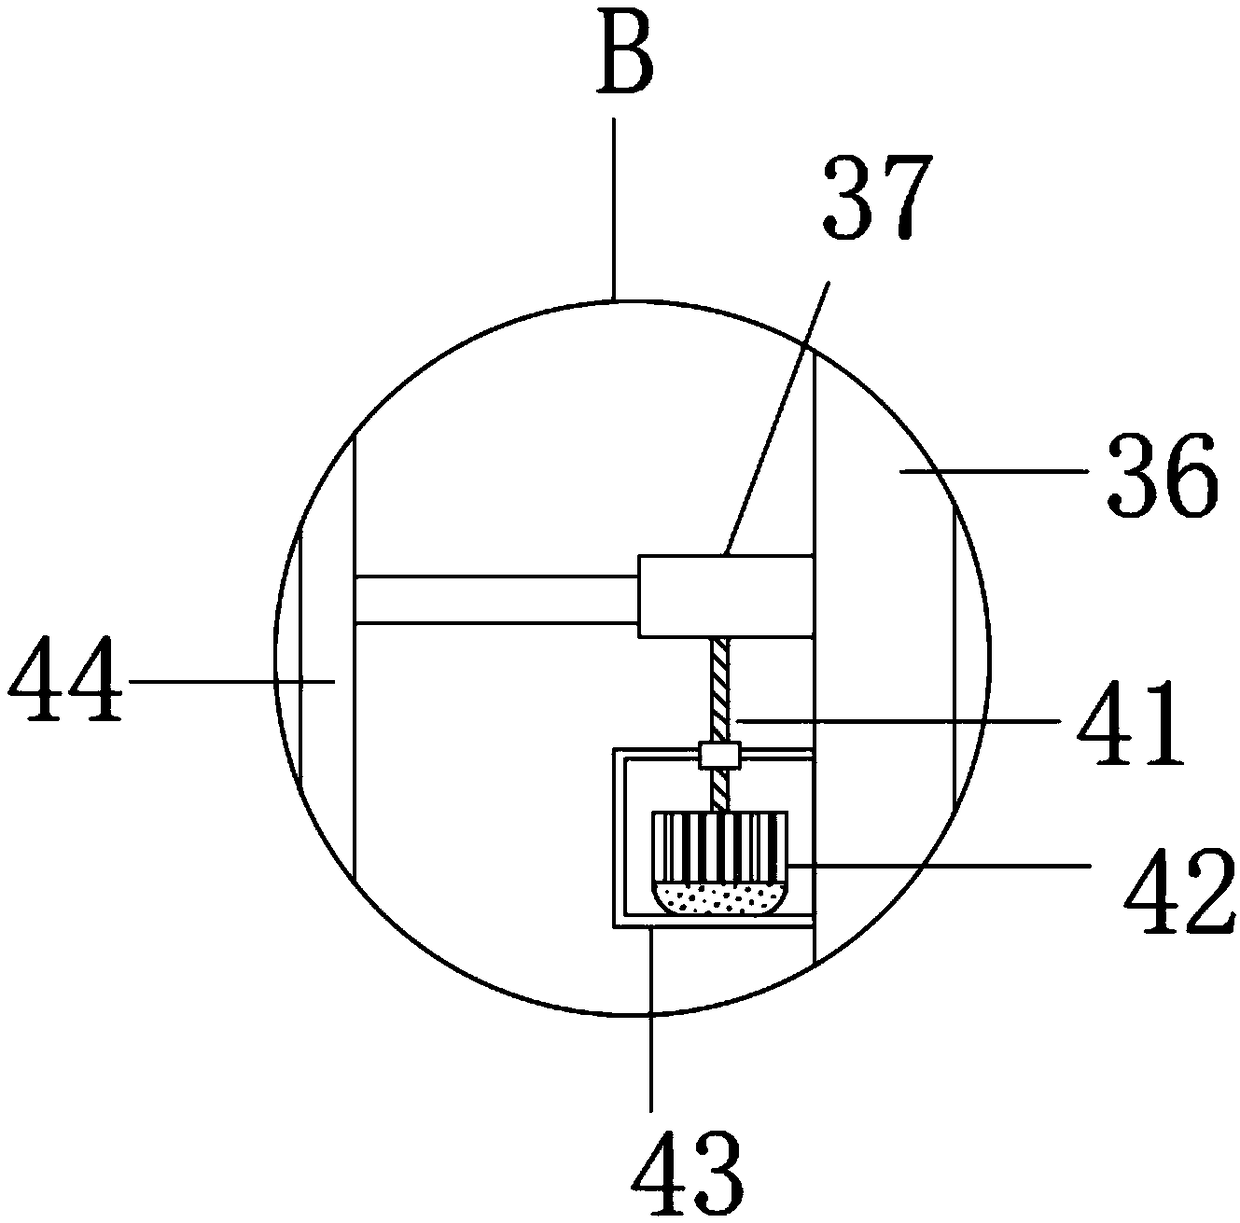 Optical experiment display device for physical teaching